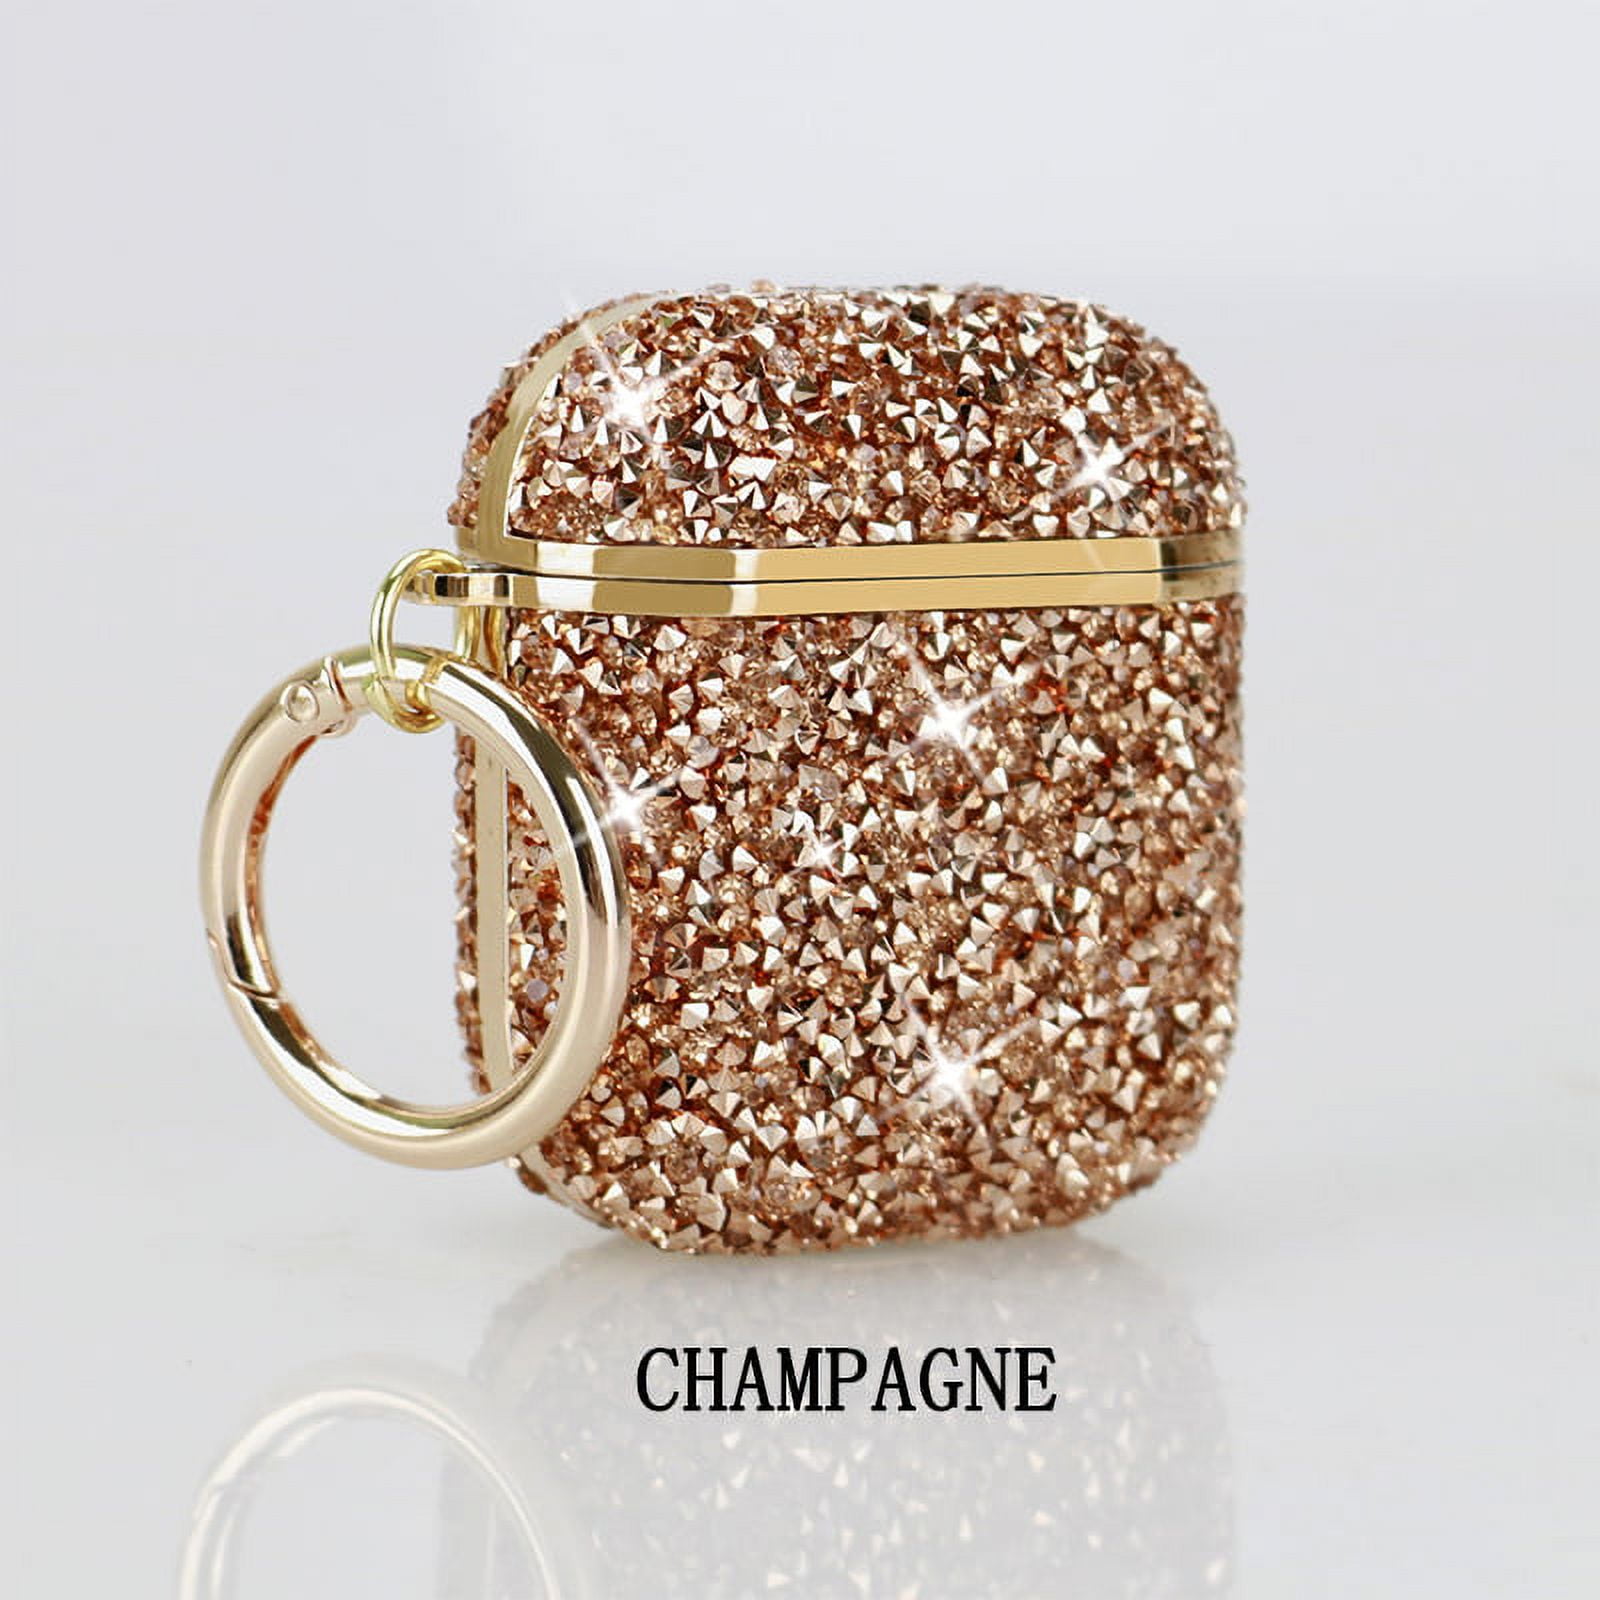 AirPods Pro Case, Luxury Glitter Hard Cover,Shockproof Protective AirPod  Accessories with Keychain for Apple AirPods Pro Charging Case - Gold